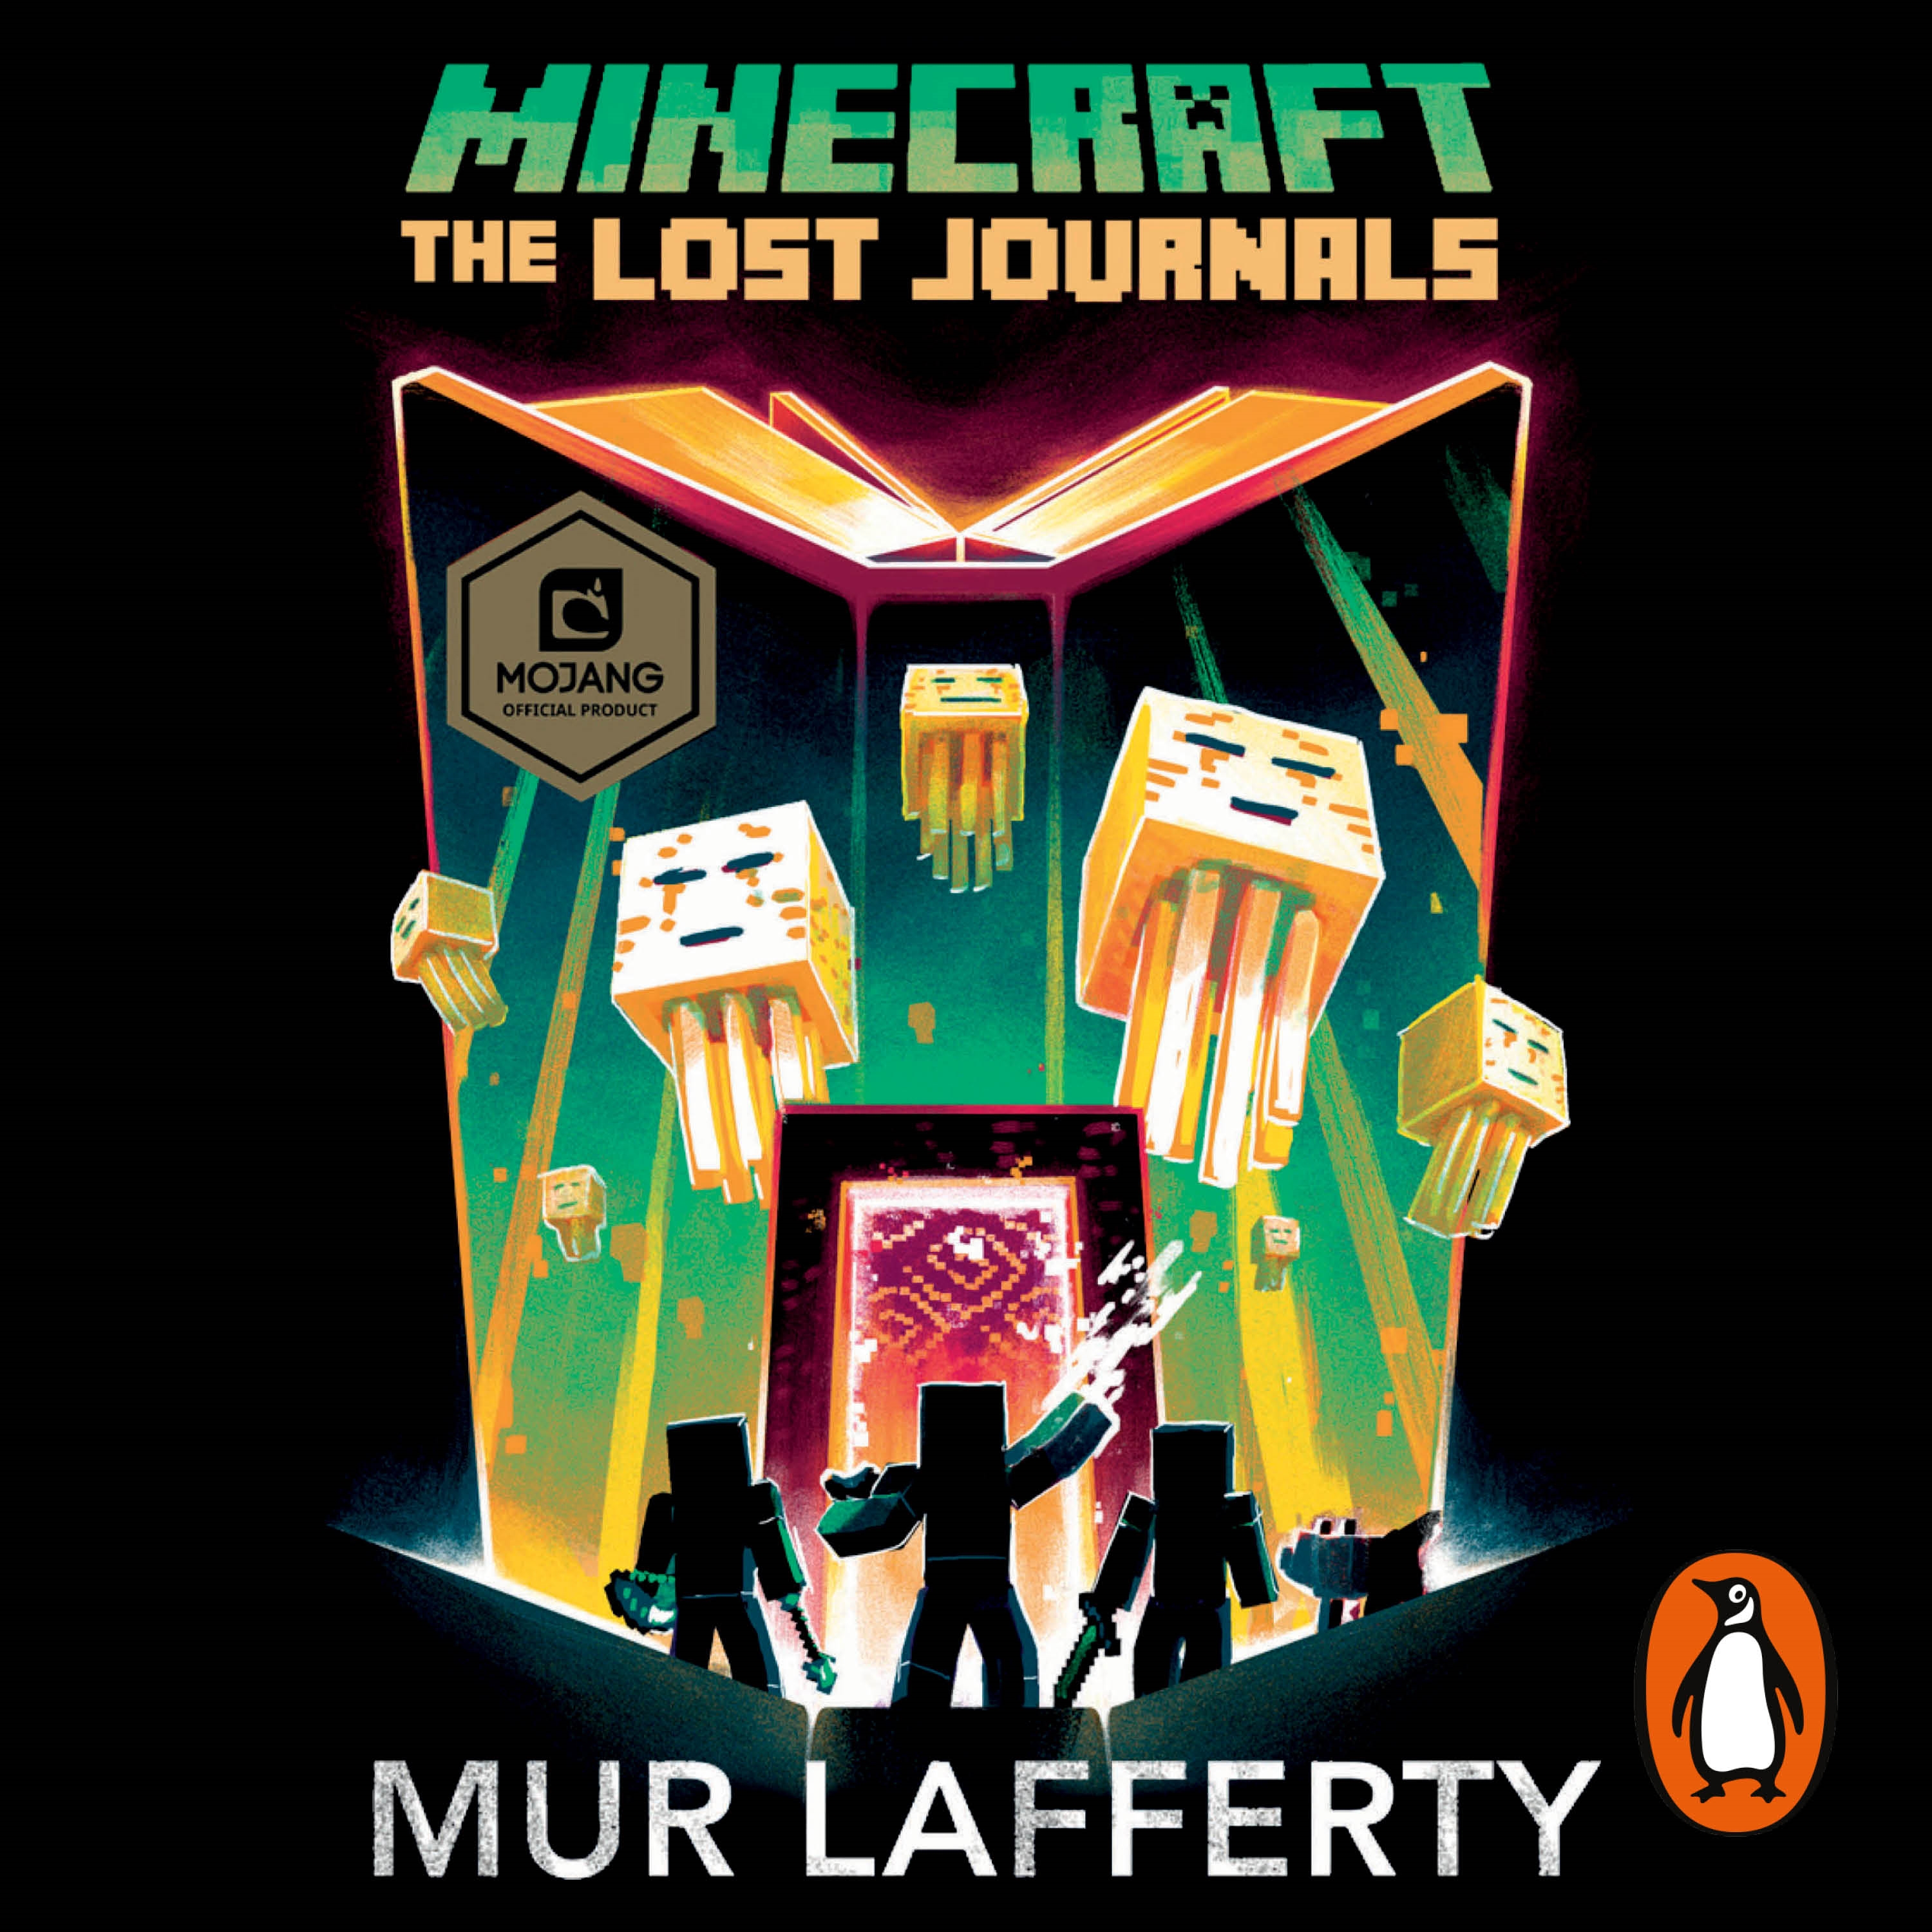 The lost journals: an official minecraft novel pdf free. download full